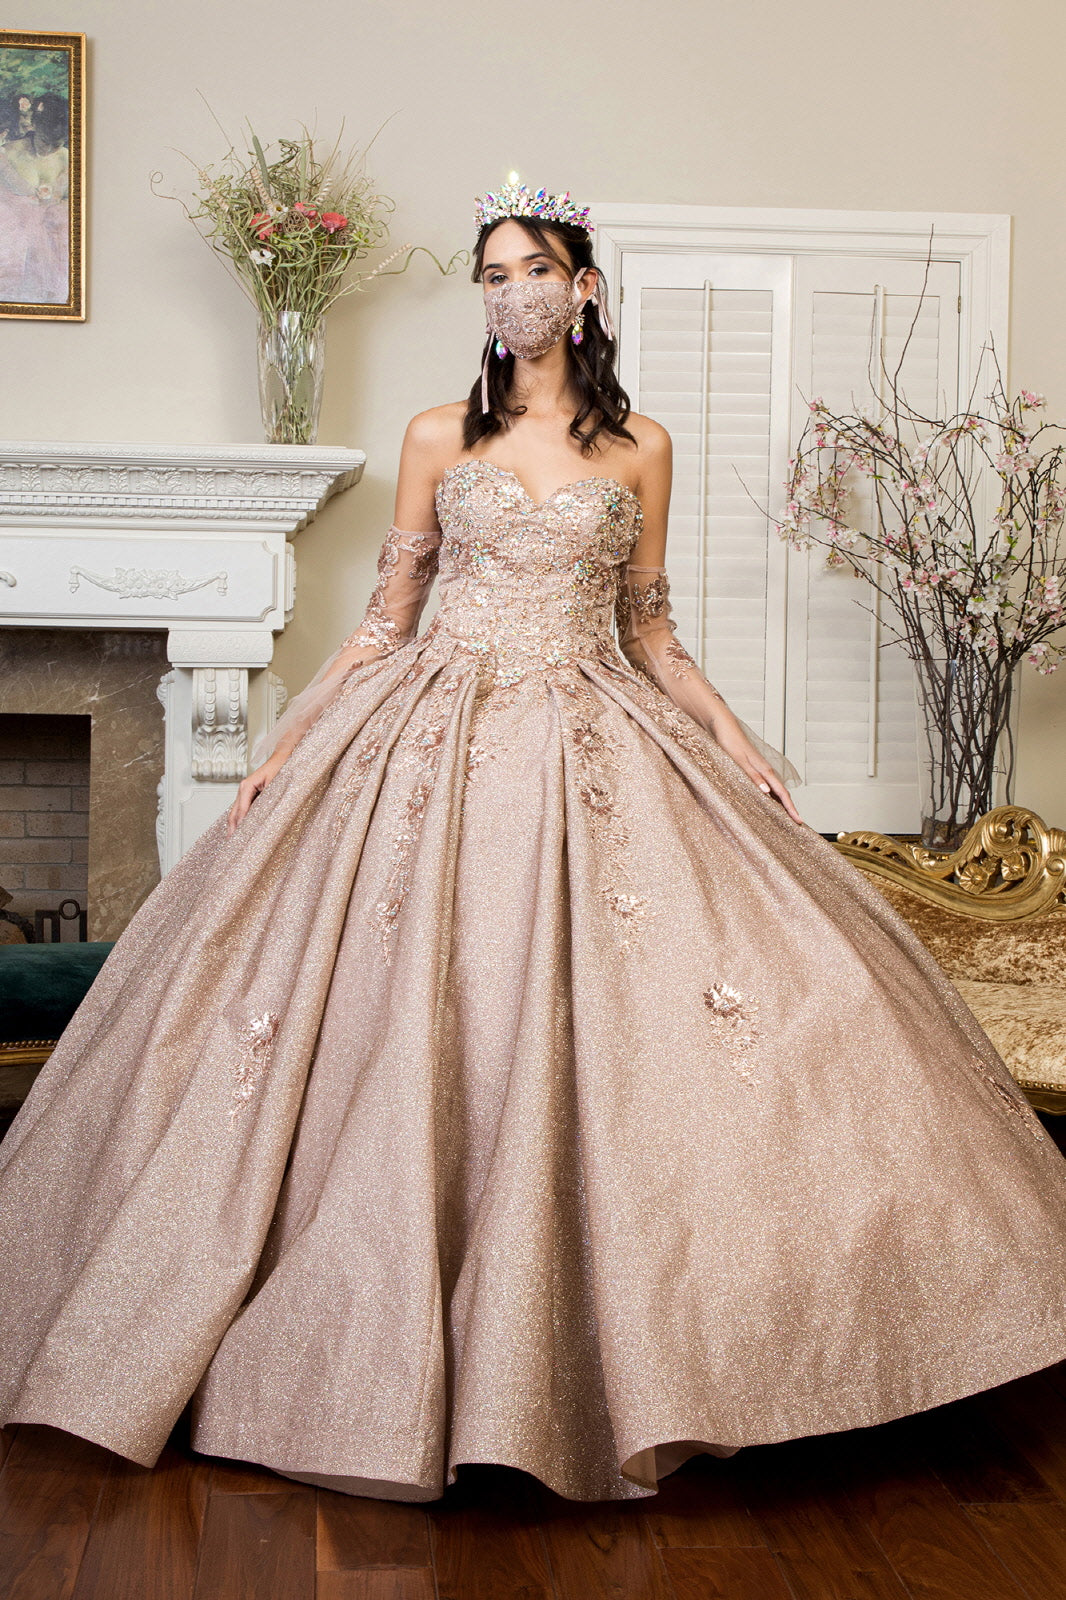 Sweethearted Ruffle Tail Quinceanera Dress Detached Mesh Sleeve - Mask Not Included GLGL1912 Elsy Style QUINCEANERA